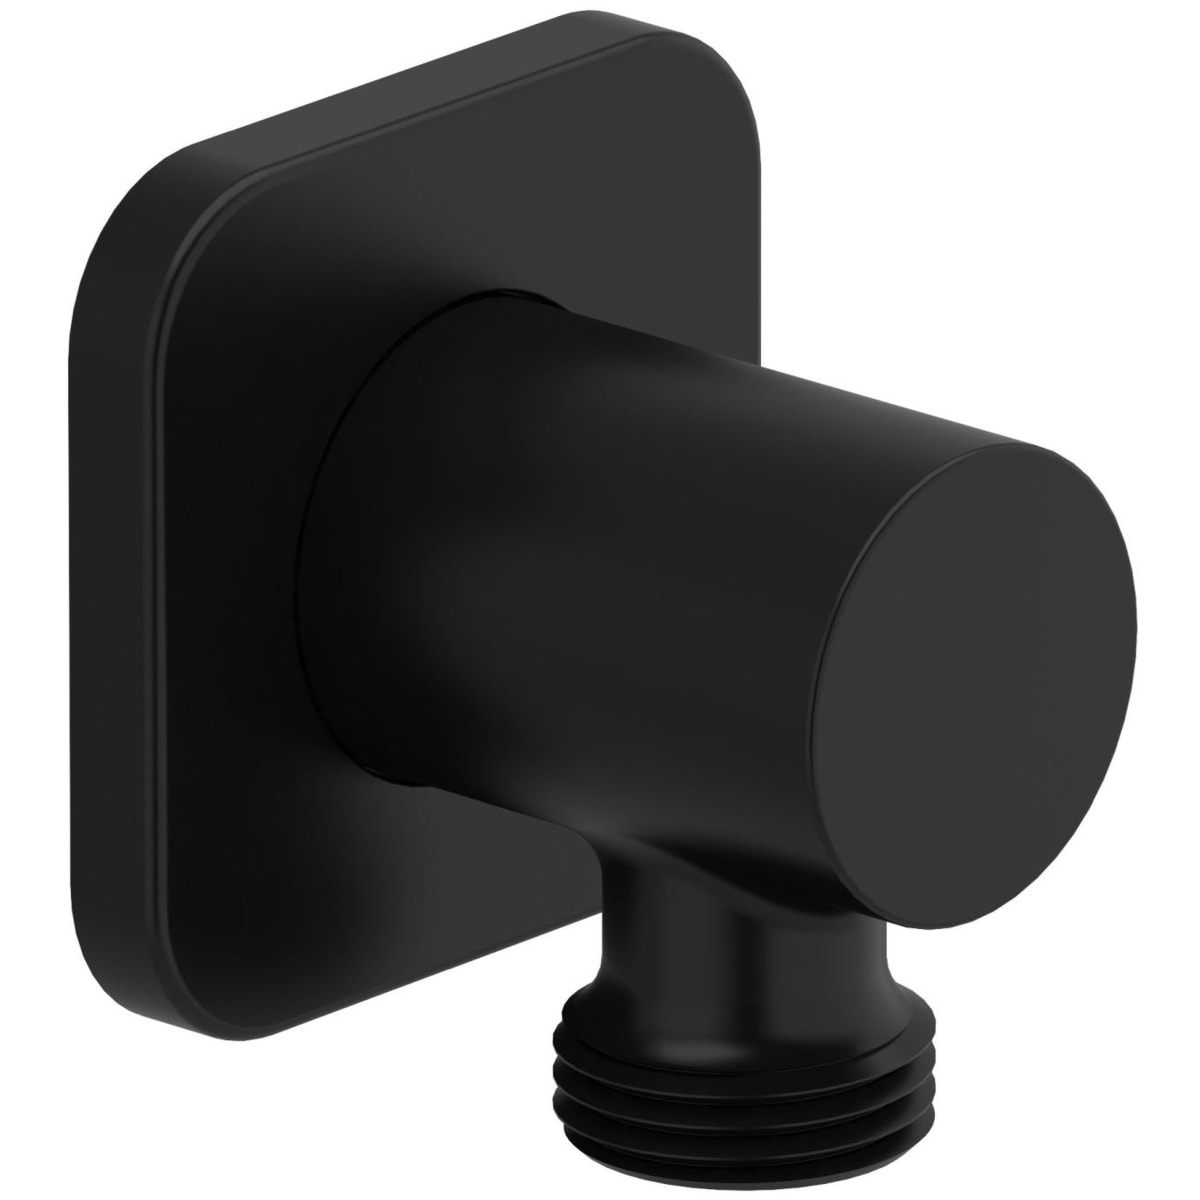 Signature Hardware Swivel Water Supply Elbow and Bracket for Hand Shower